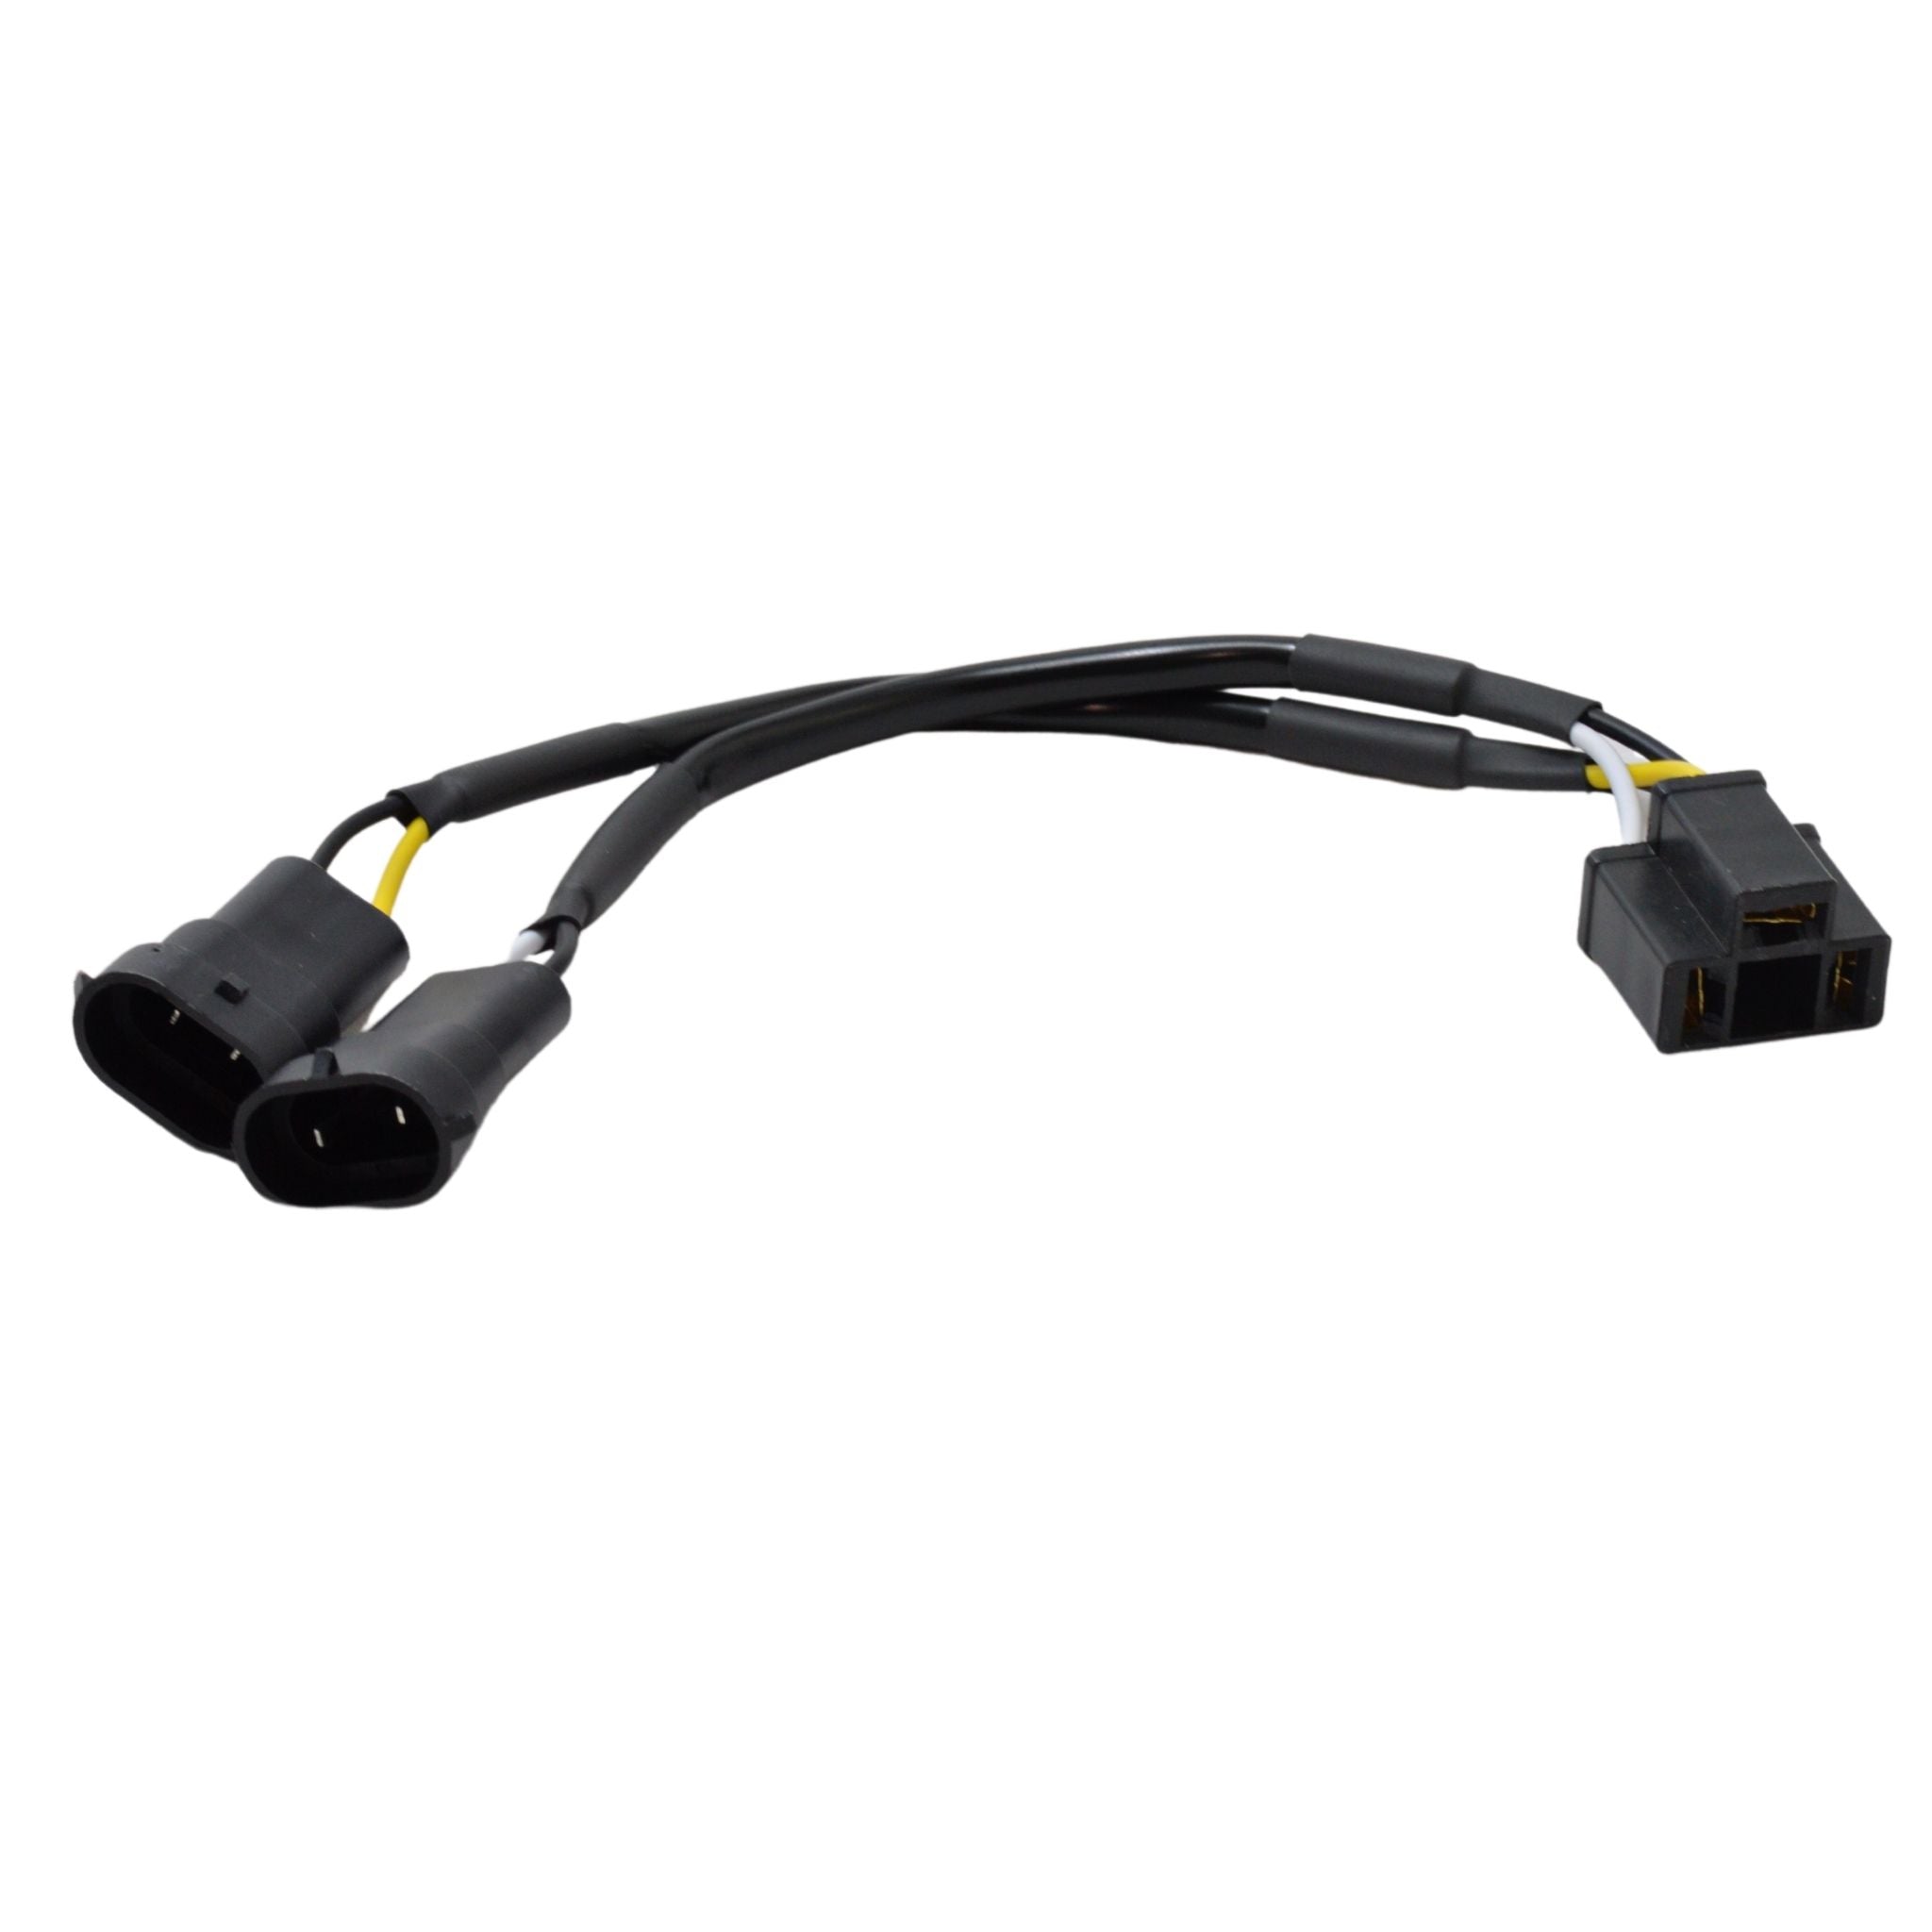 H9/H11 to H4 LED headlight adapter